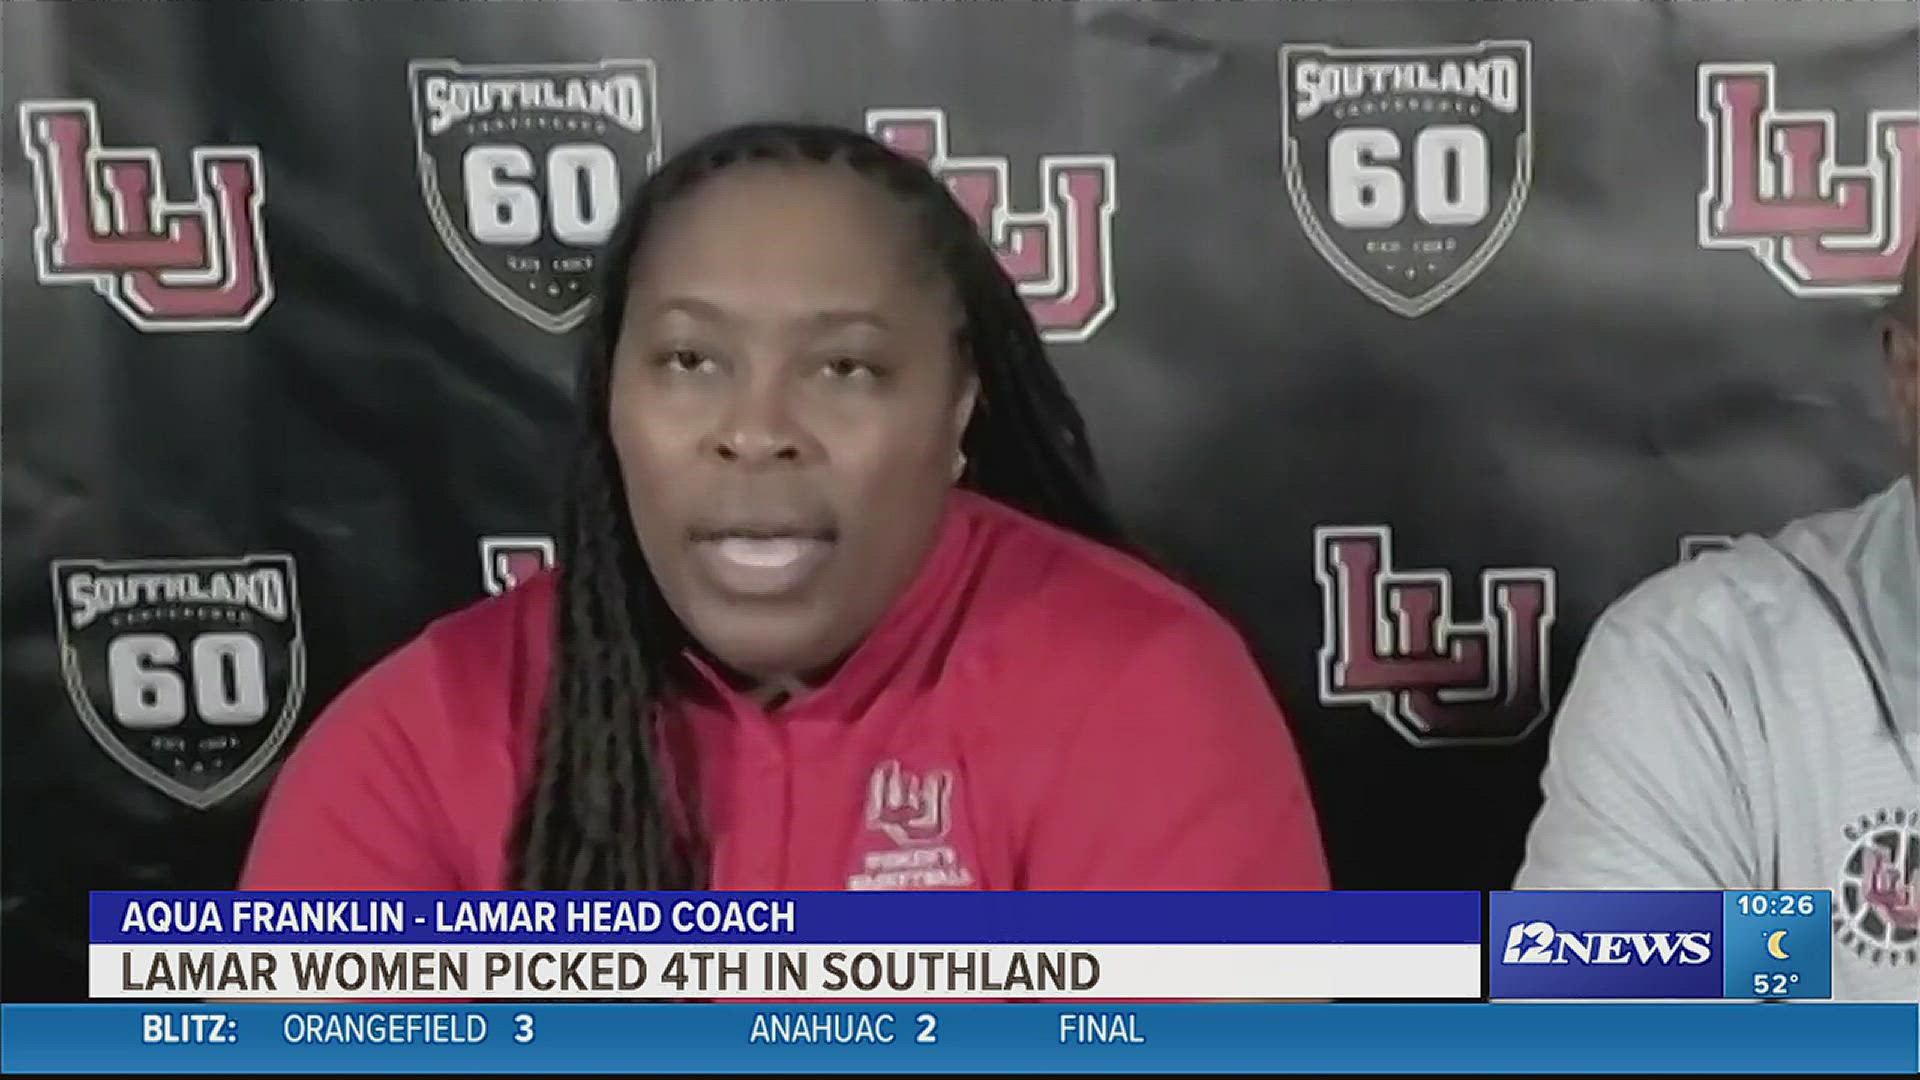 Lamar women's basketball team is expected to contend for title this season